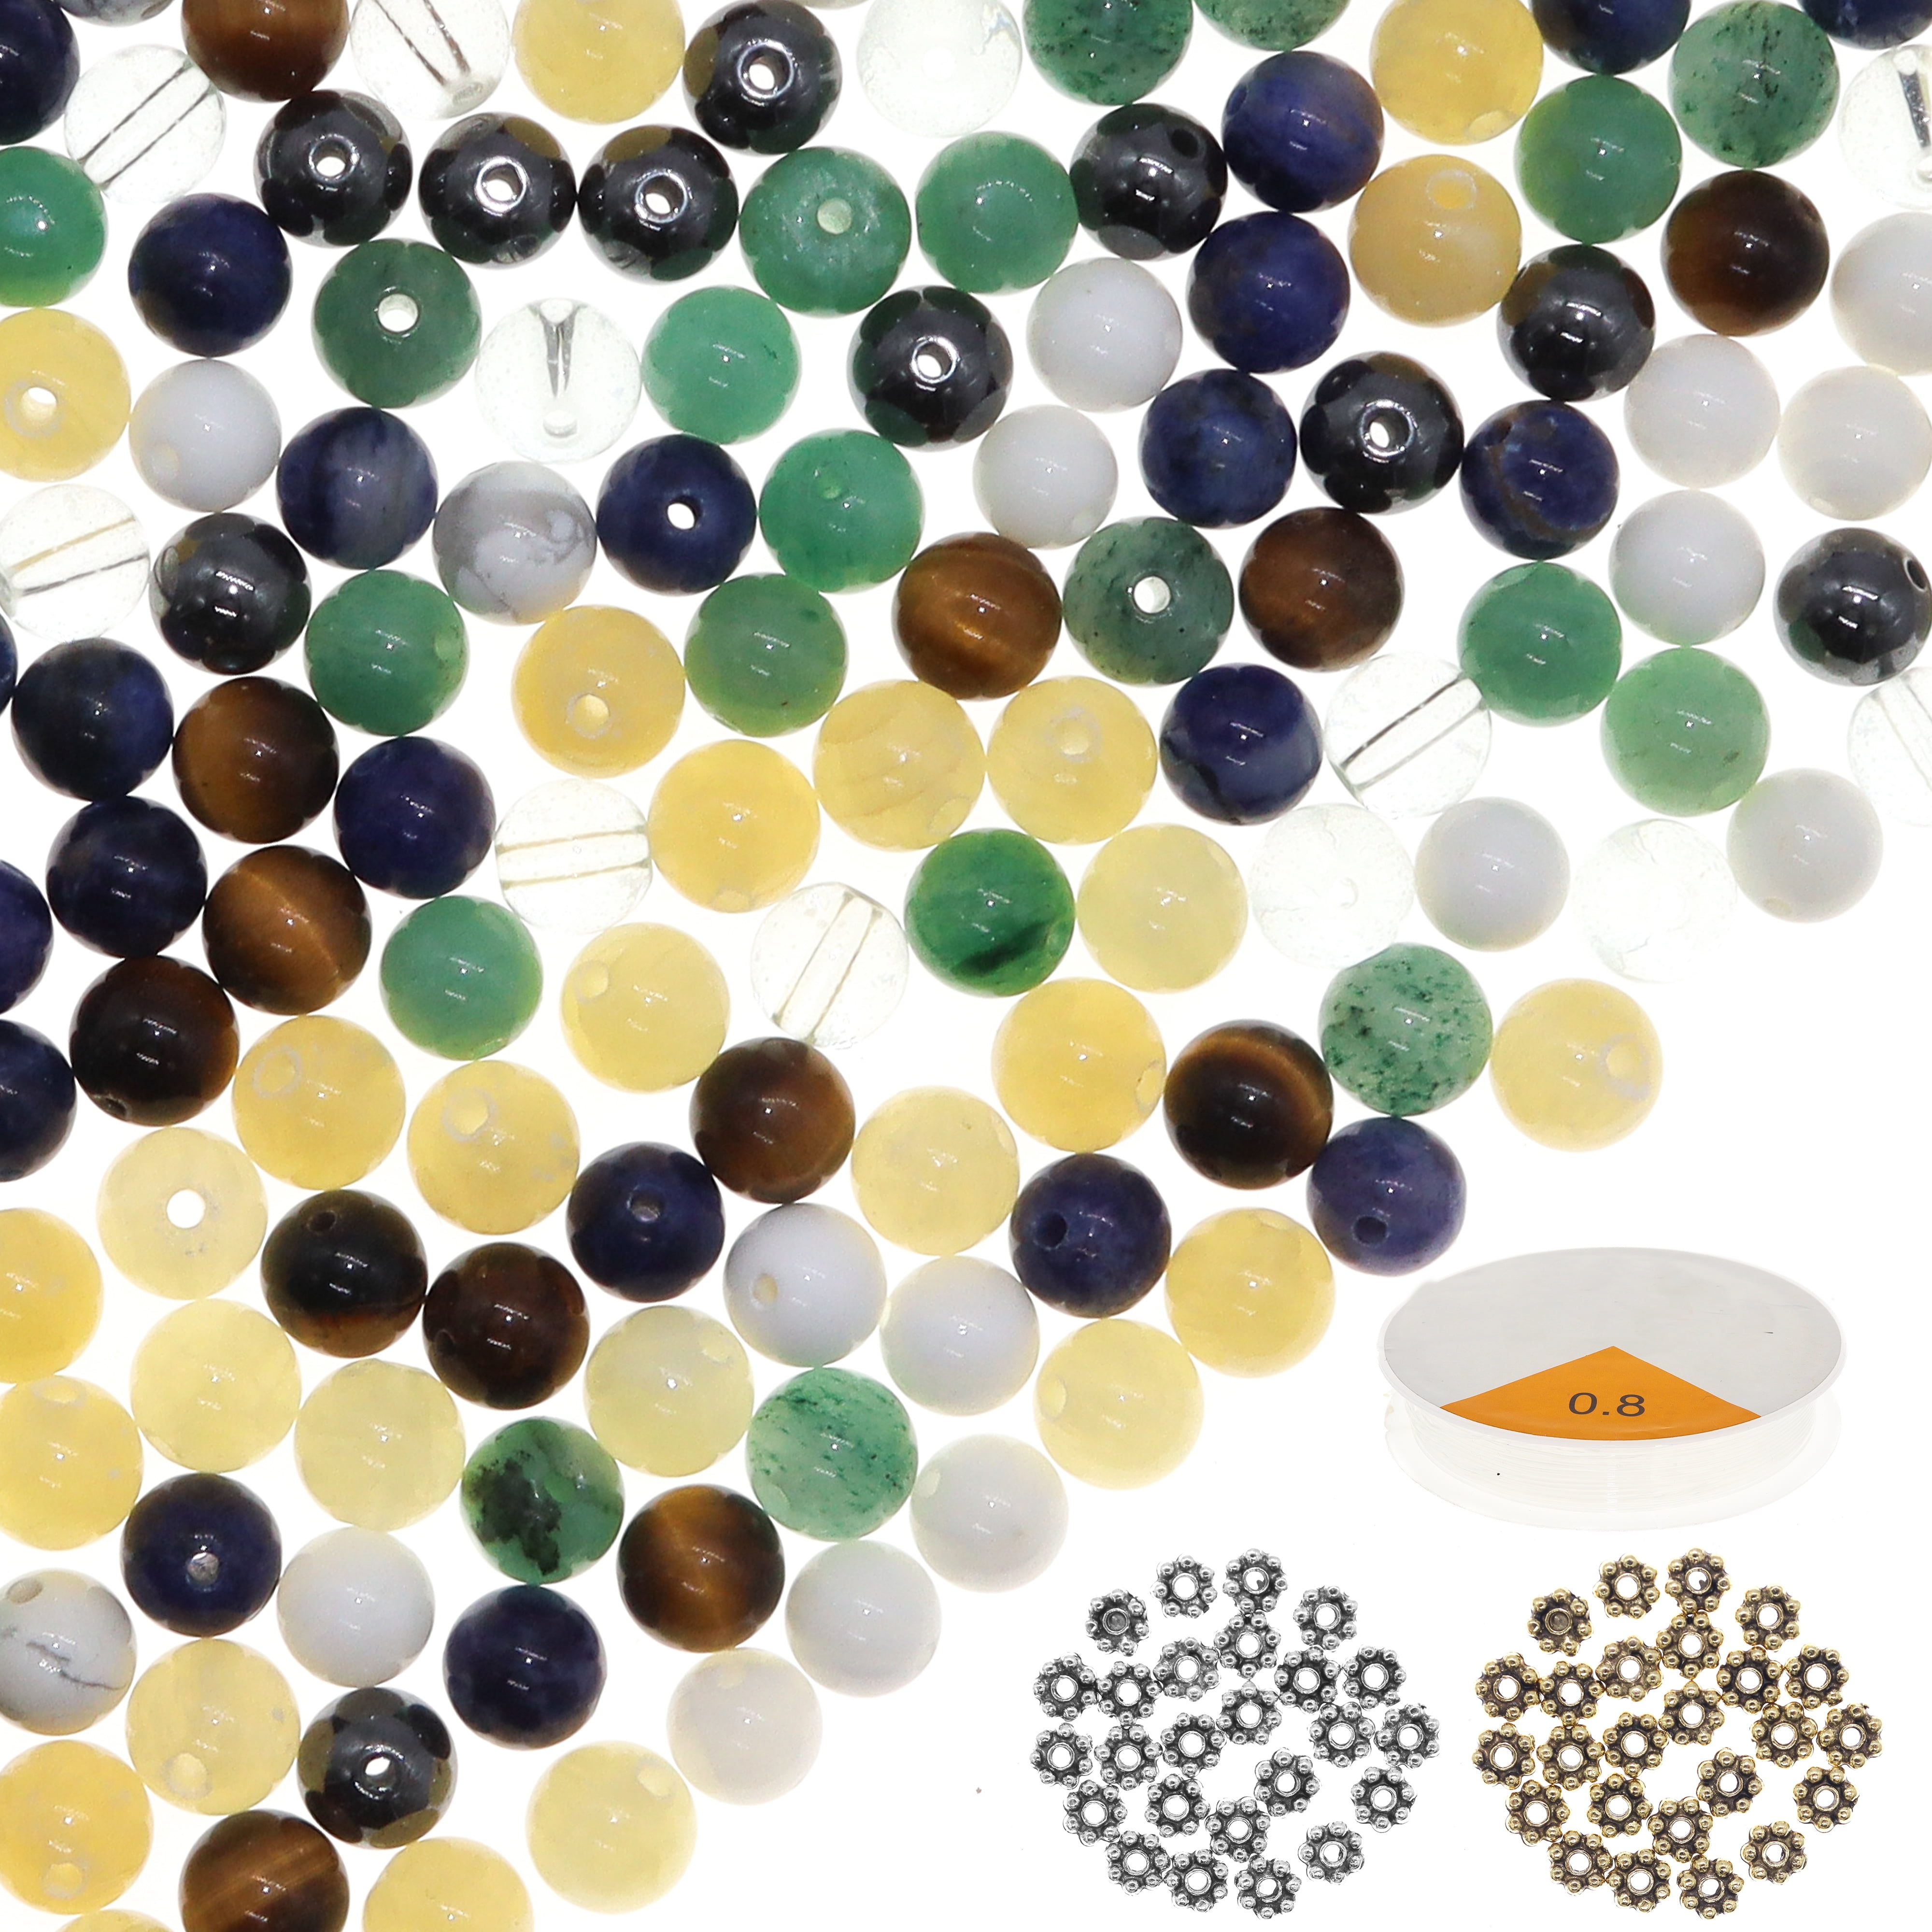 10mm 80pcs Natural Assorted Color Round Loose Beads for Jewelry Making Bracelet Chakra Gemstones with Stretch Cord